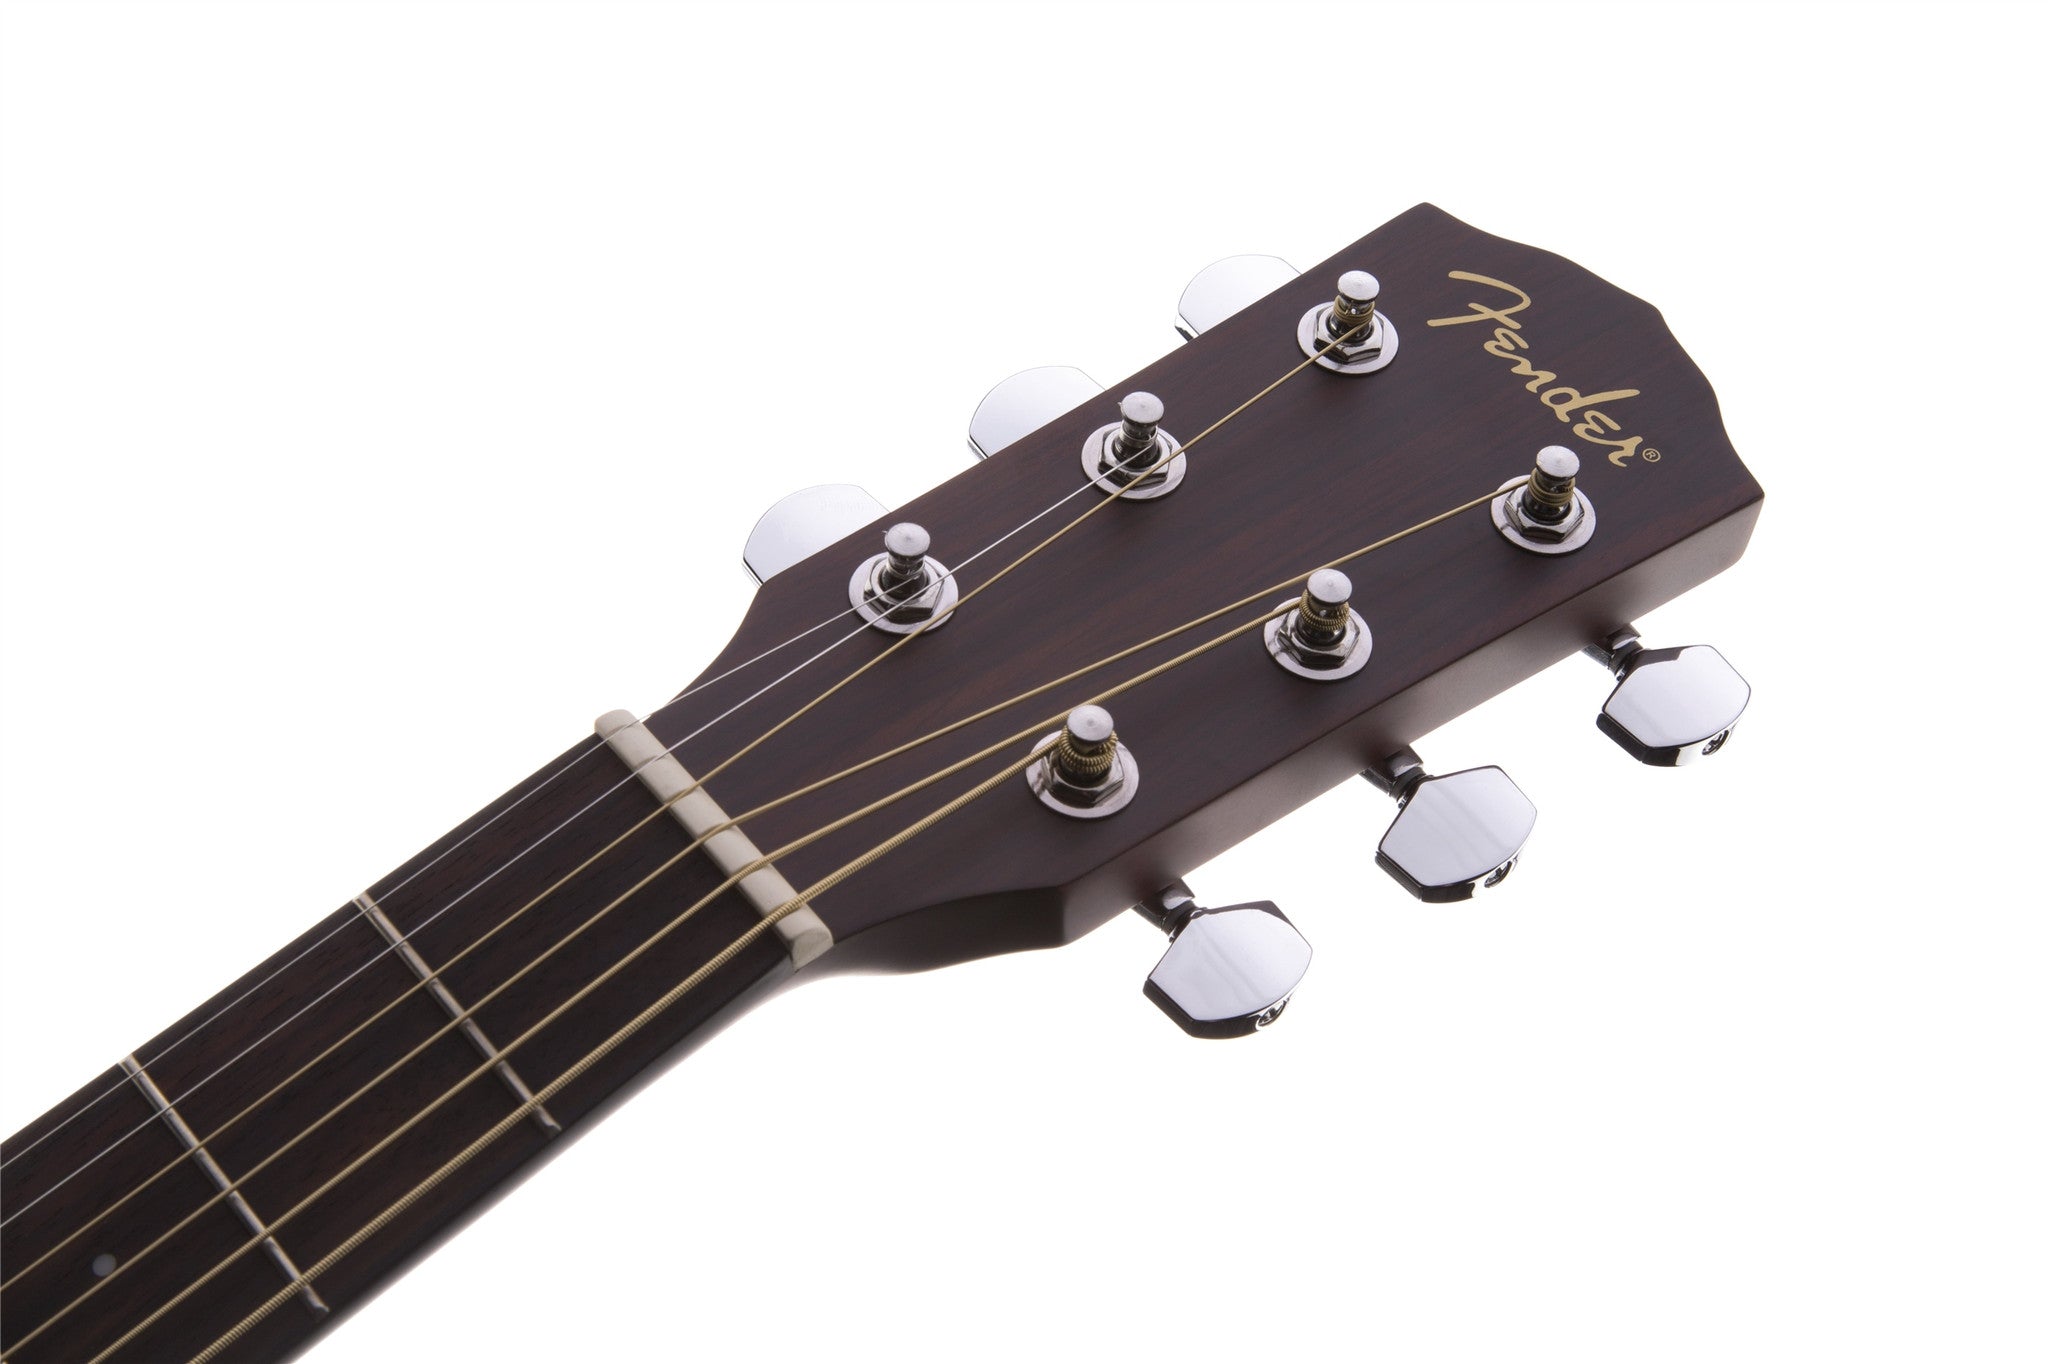 Fender CD-100CE Left-Handed, Natural 0961531021 - L.A. Music - Canada's Favourite Music Store!